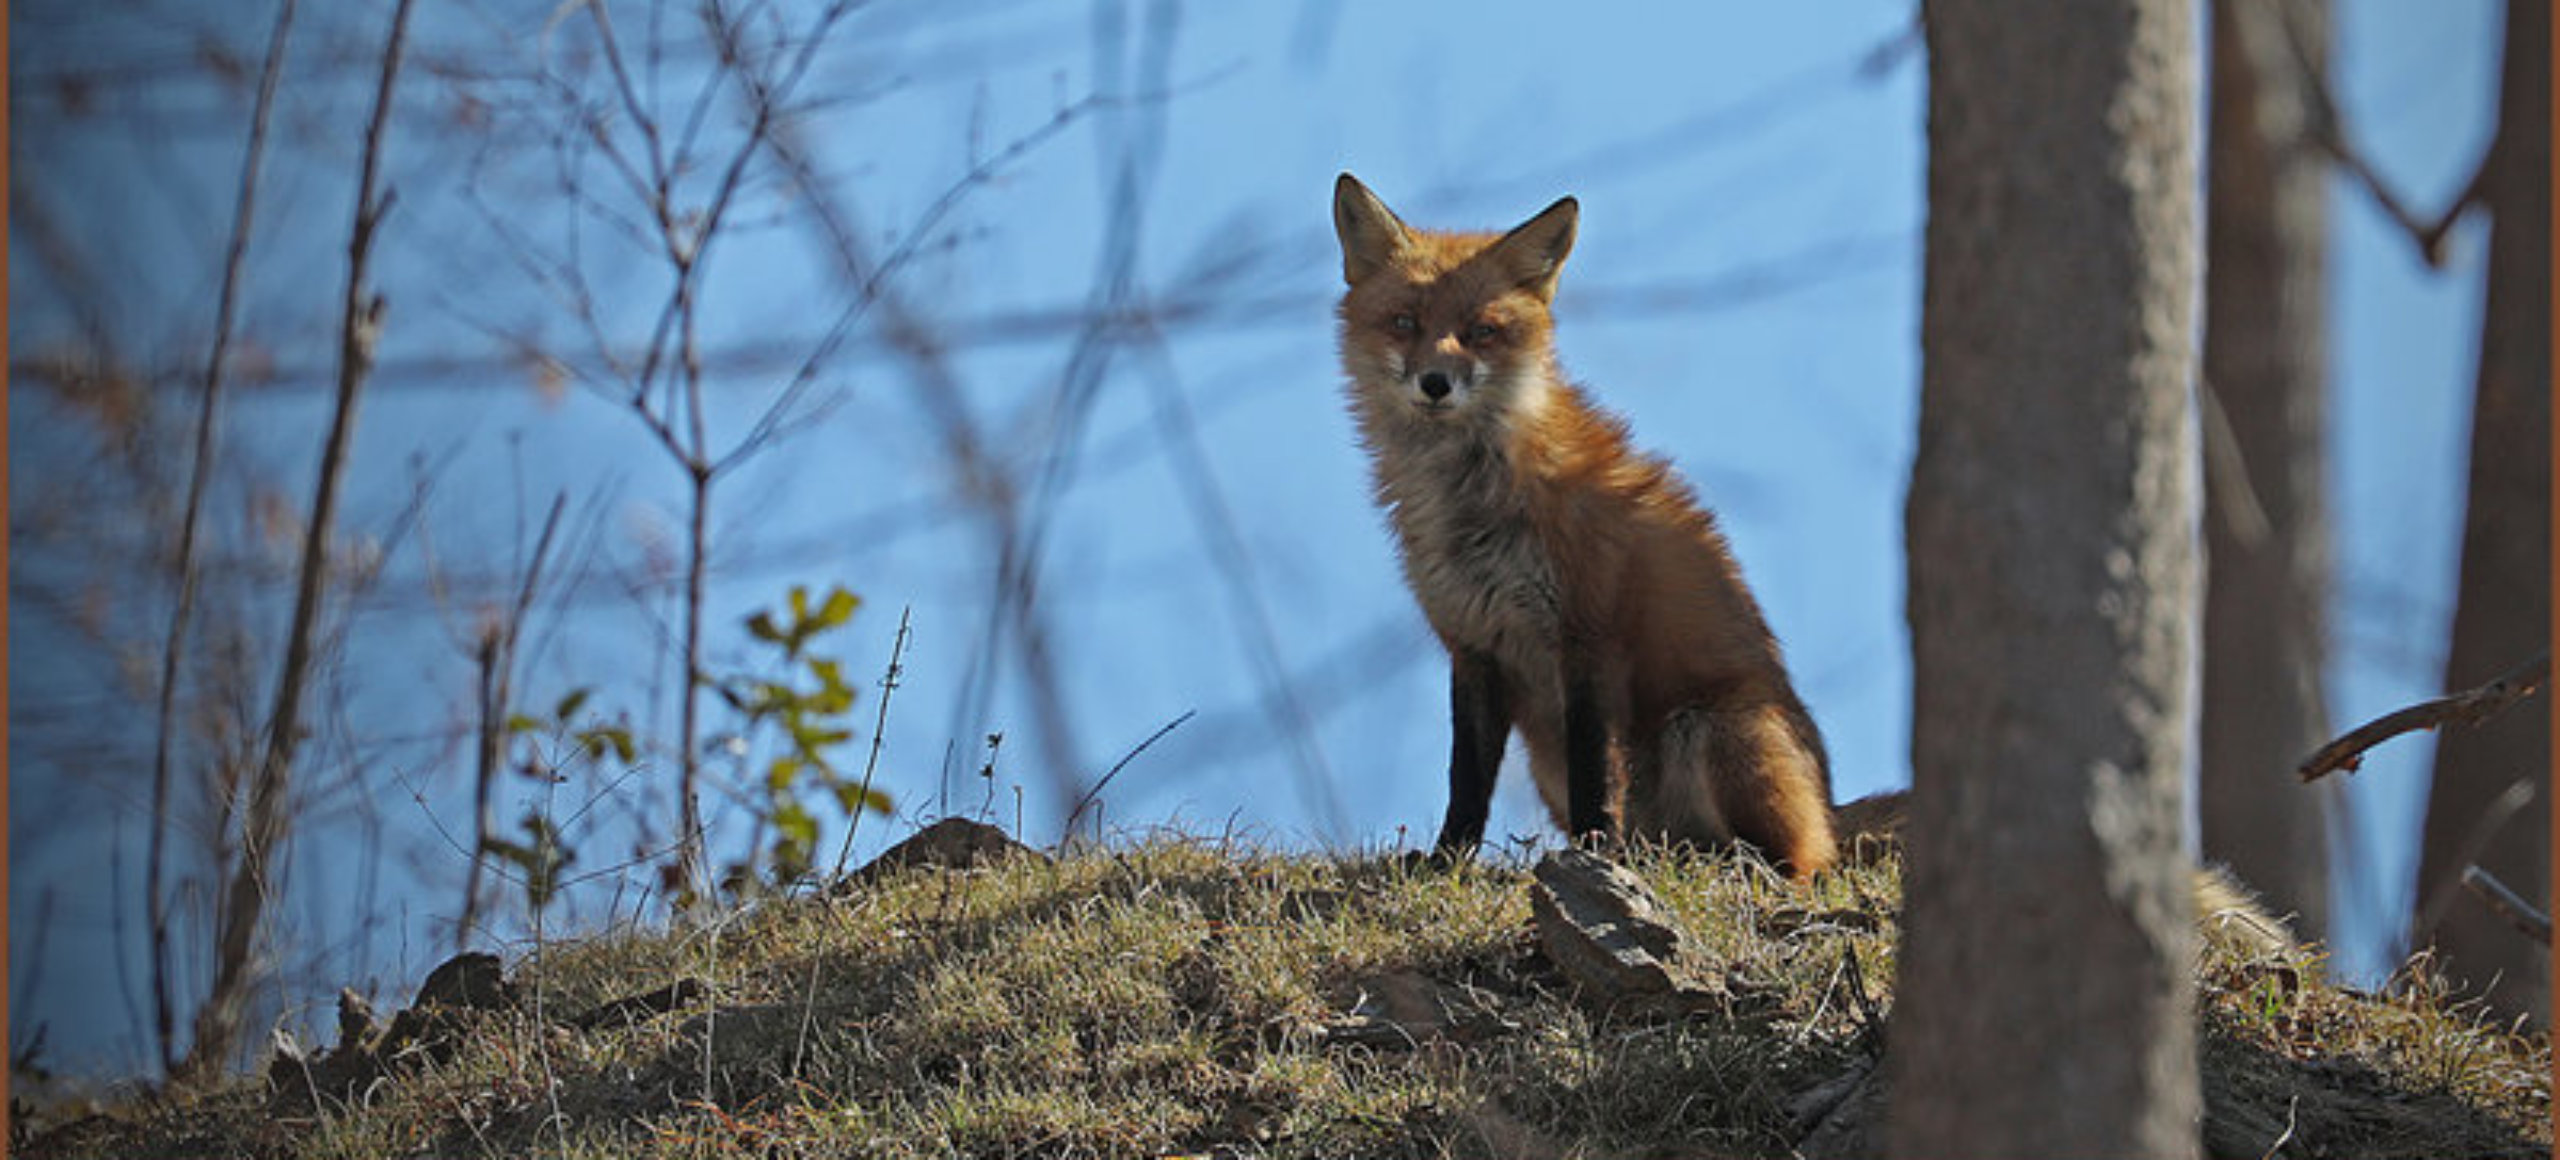 A fox on a grassy mound looks at the camera with it's back to a blue sky.